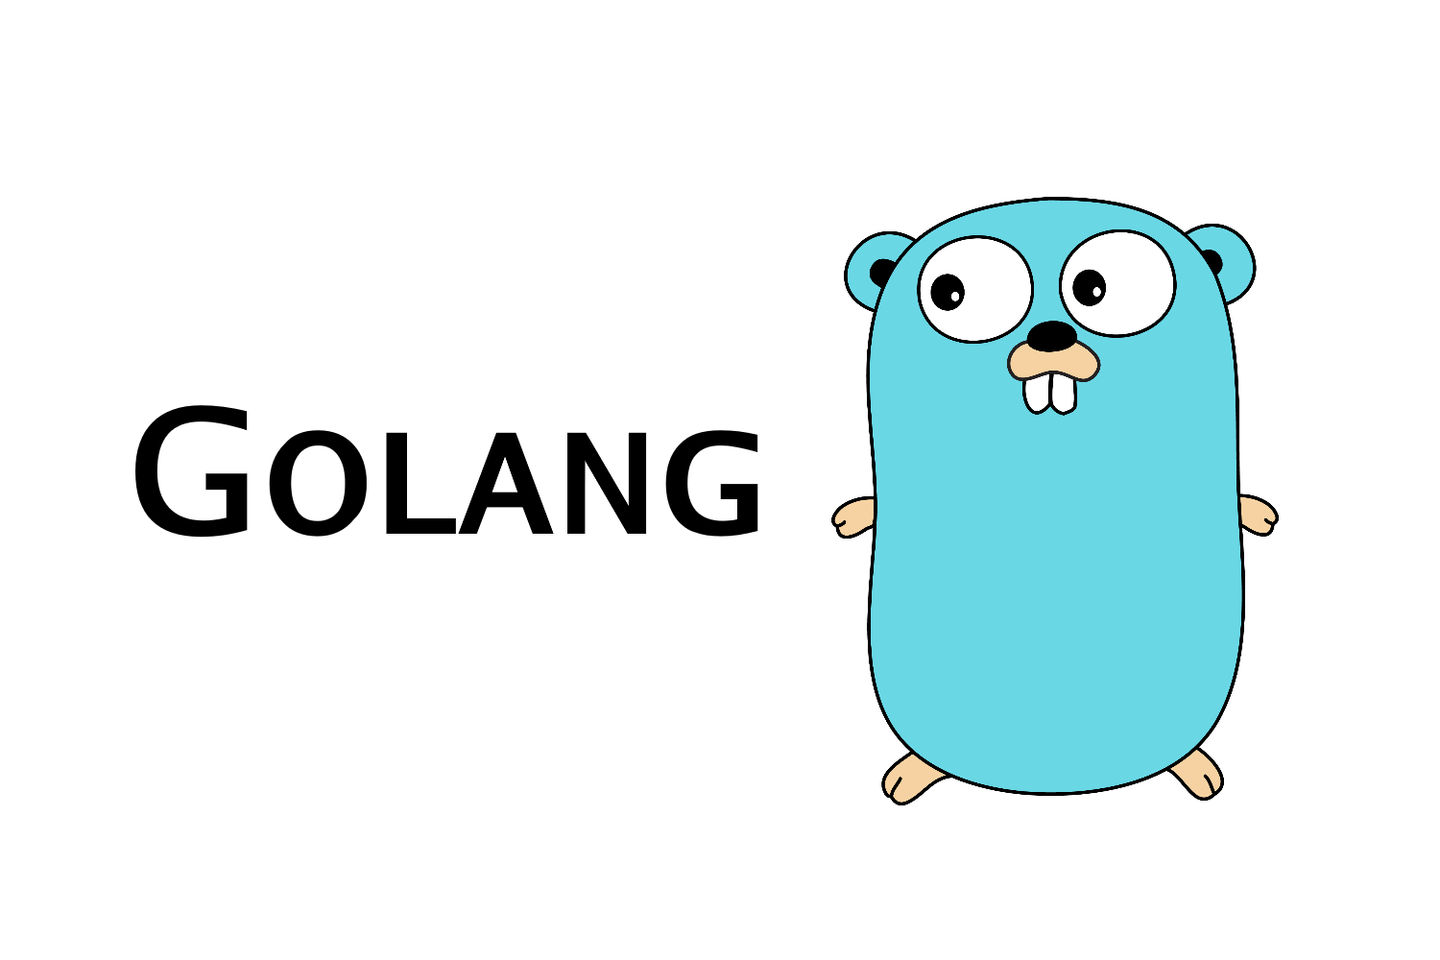 What is Go? Golang Programming Language Meaning Explained